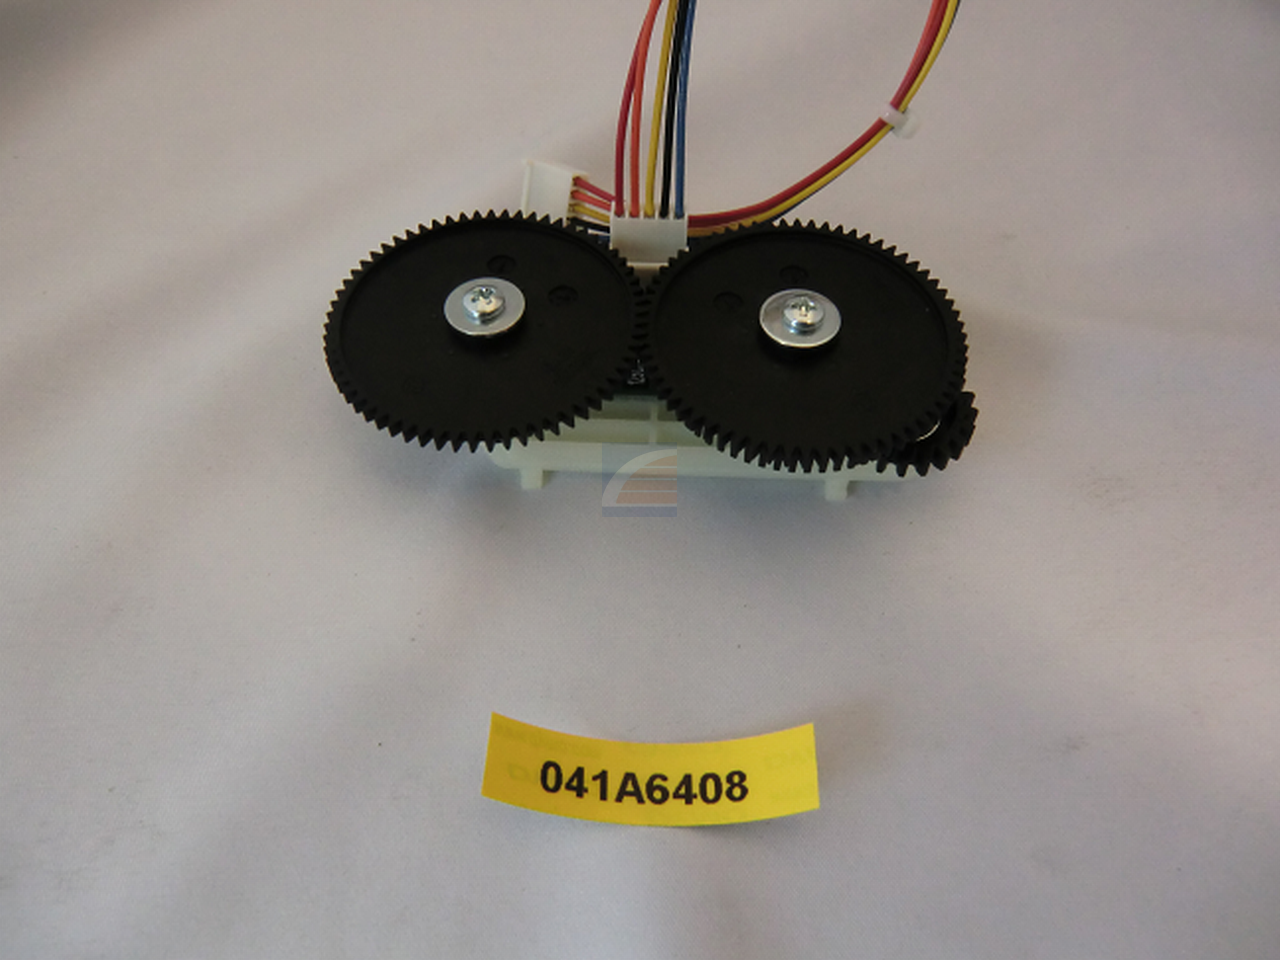 Assembly Absolute Encoder III - 041A6408